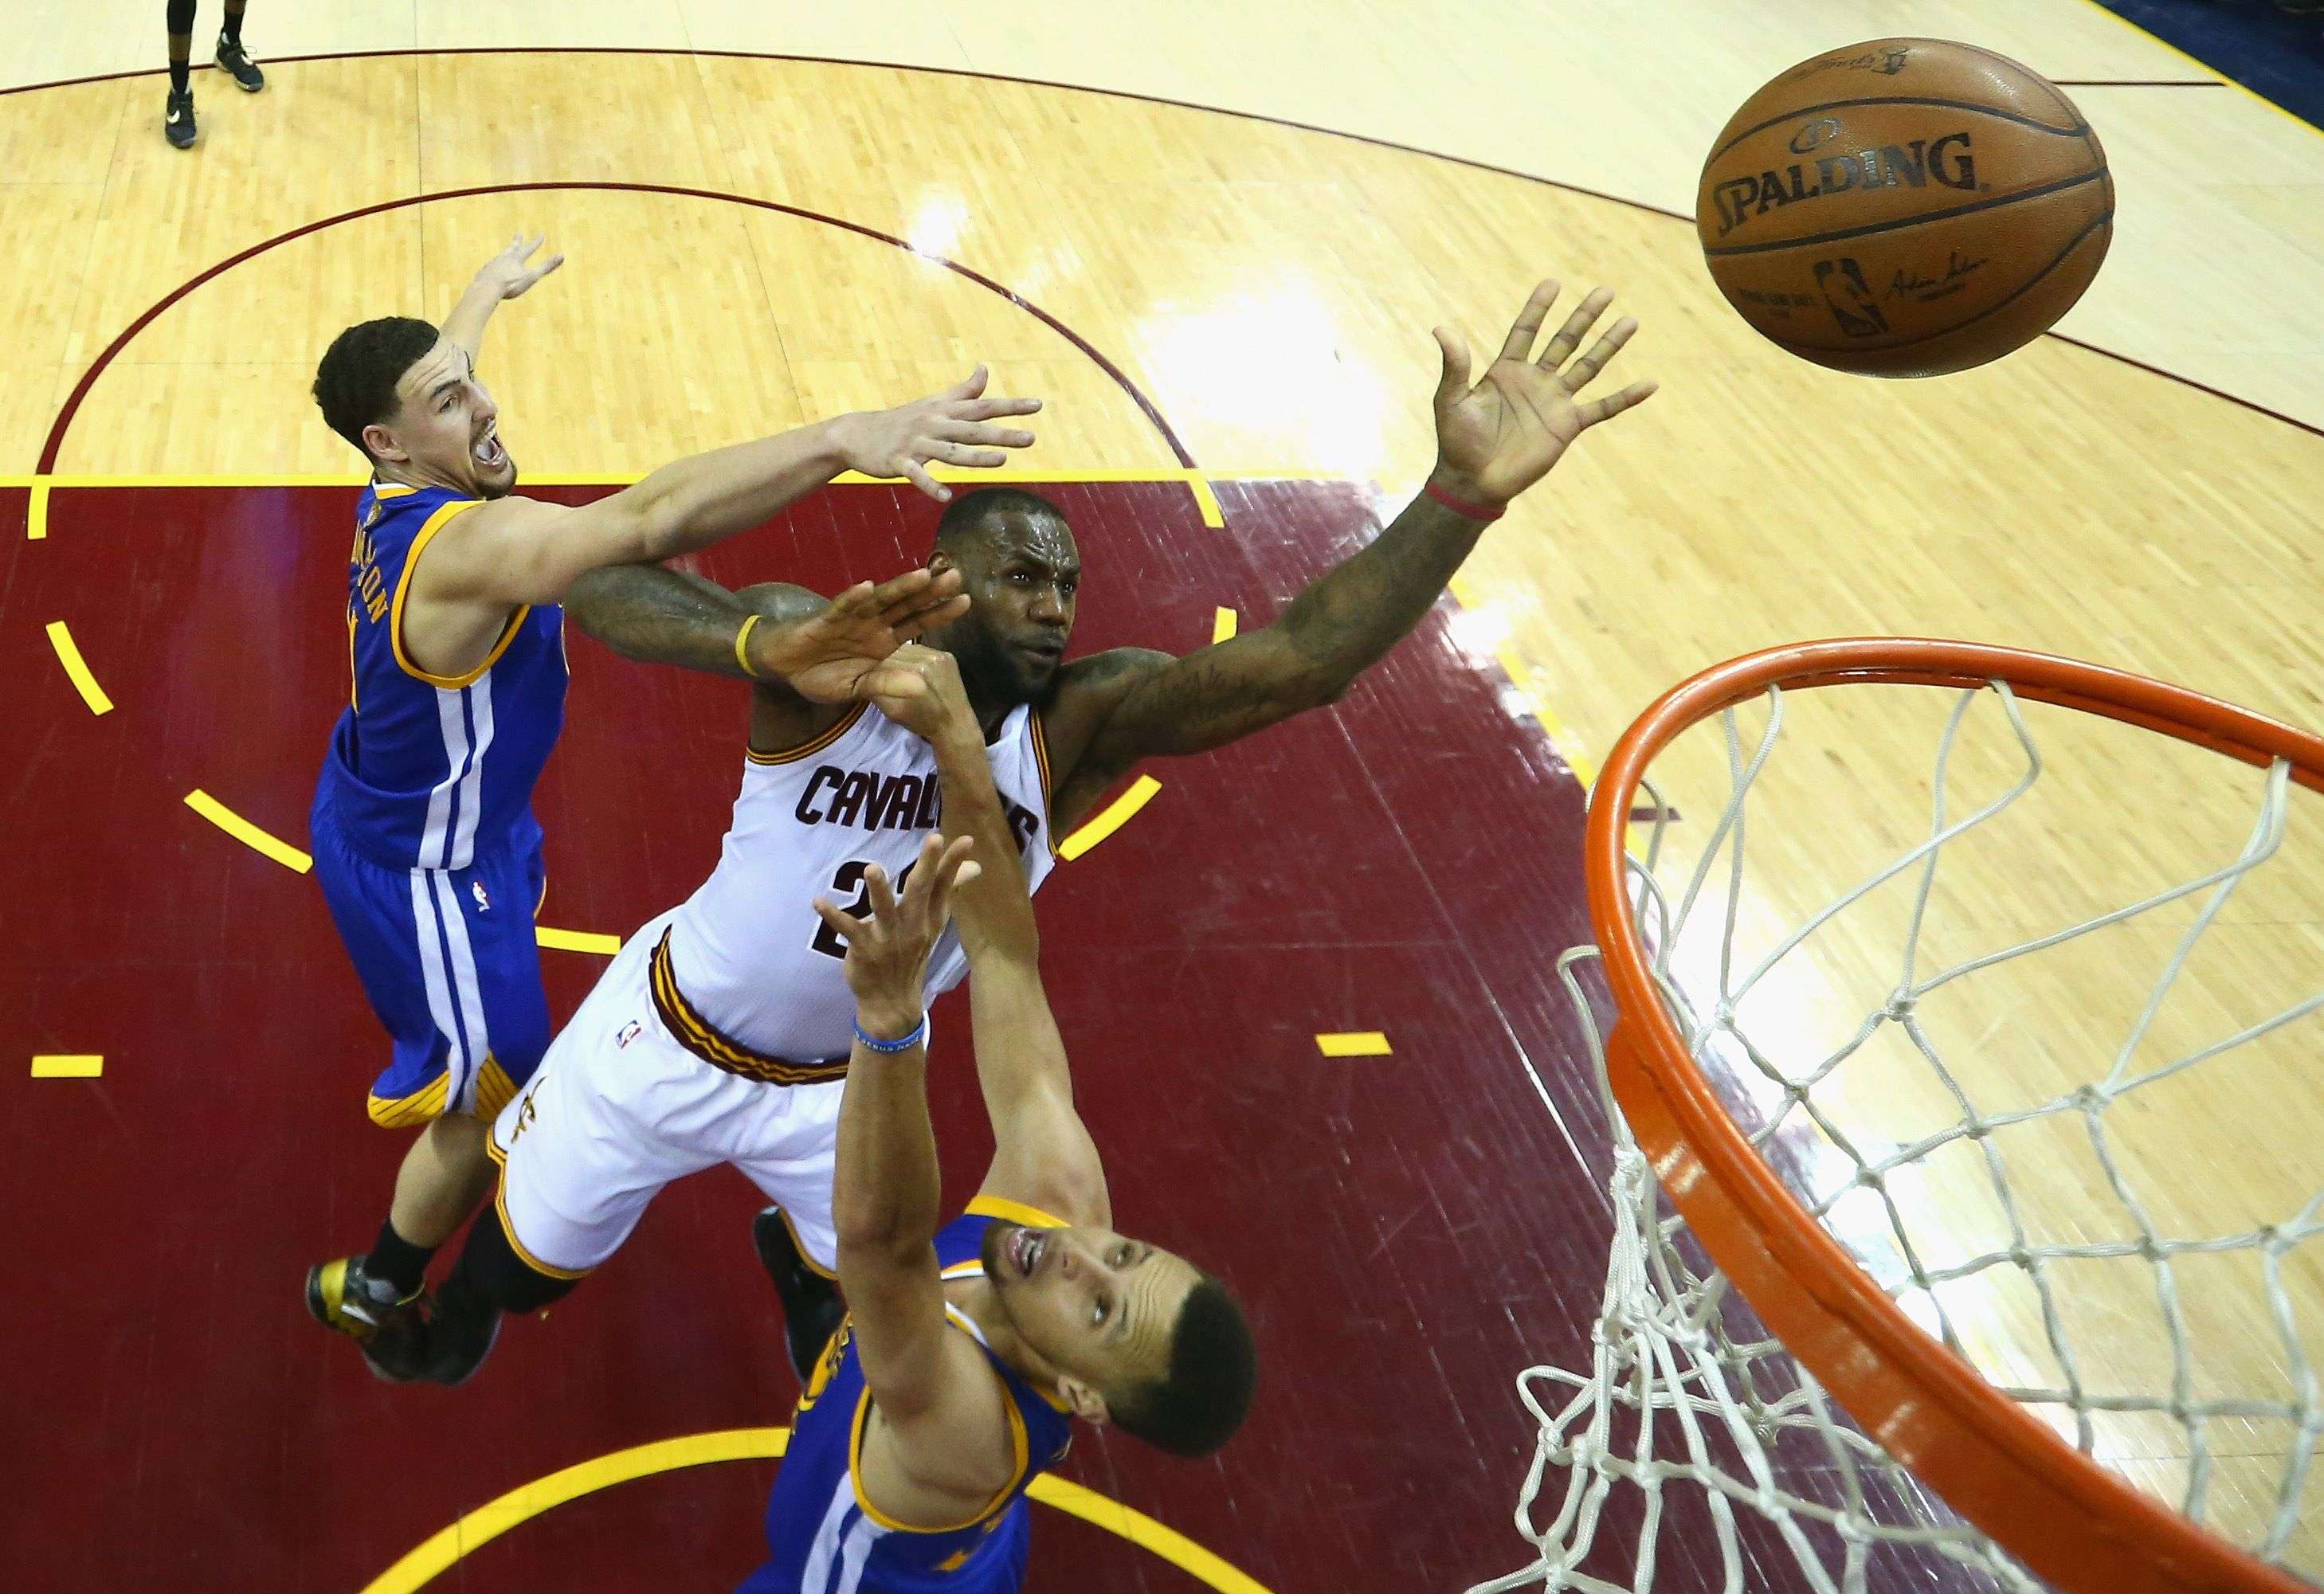 LeBron James served a timely reminder to the Warriors’ ‘Splash Brothers’ that he is still a force in NBA. Photo: AFP